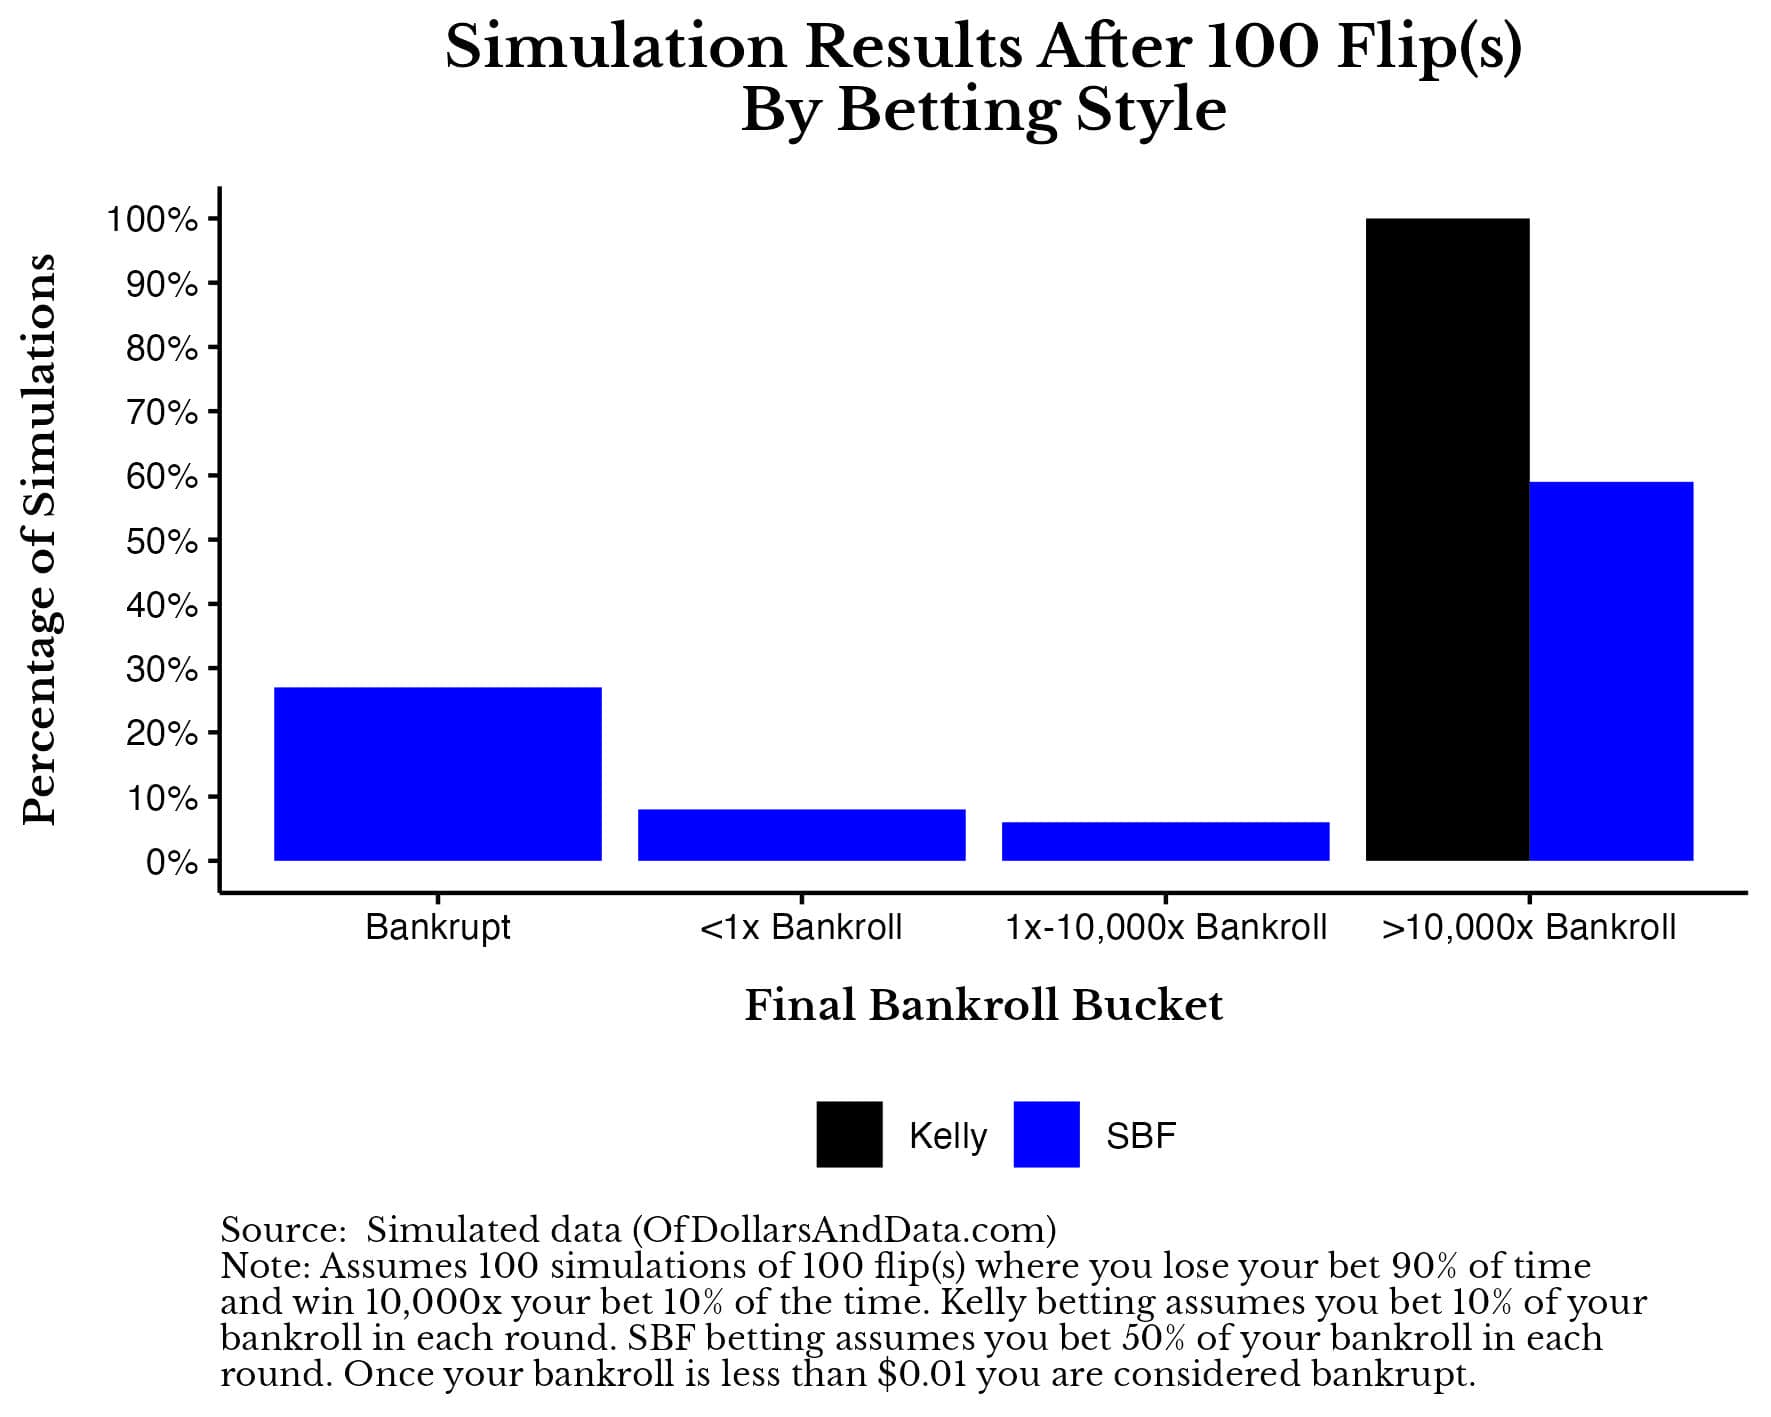 Chart of Kelly vs. SBF betting style bucketed results for 100 flip game.